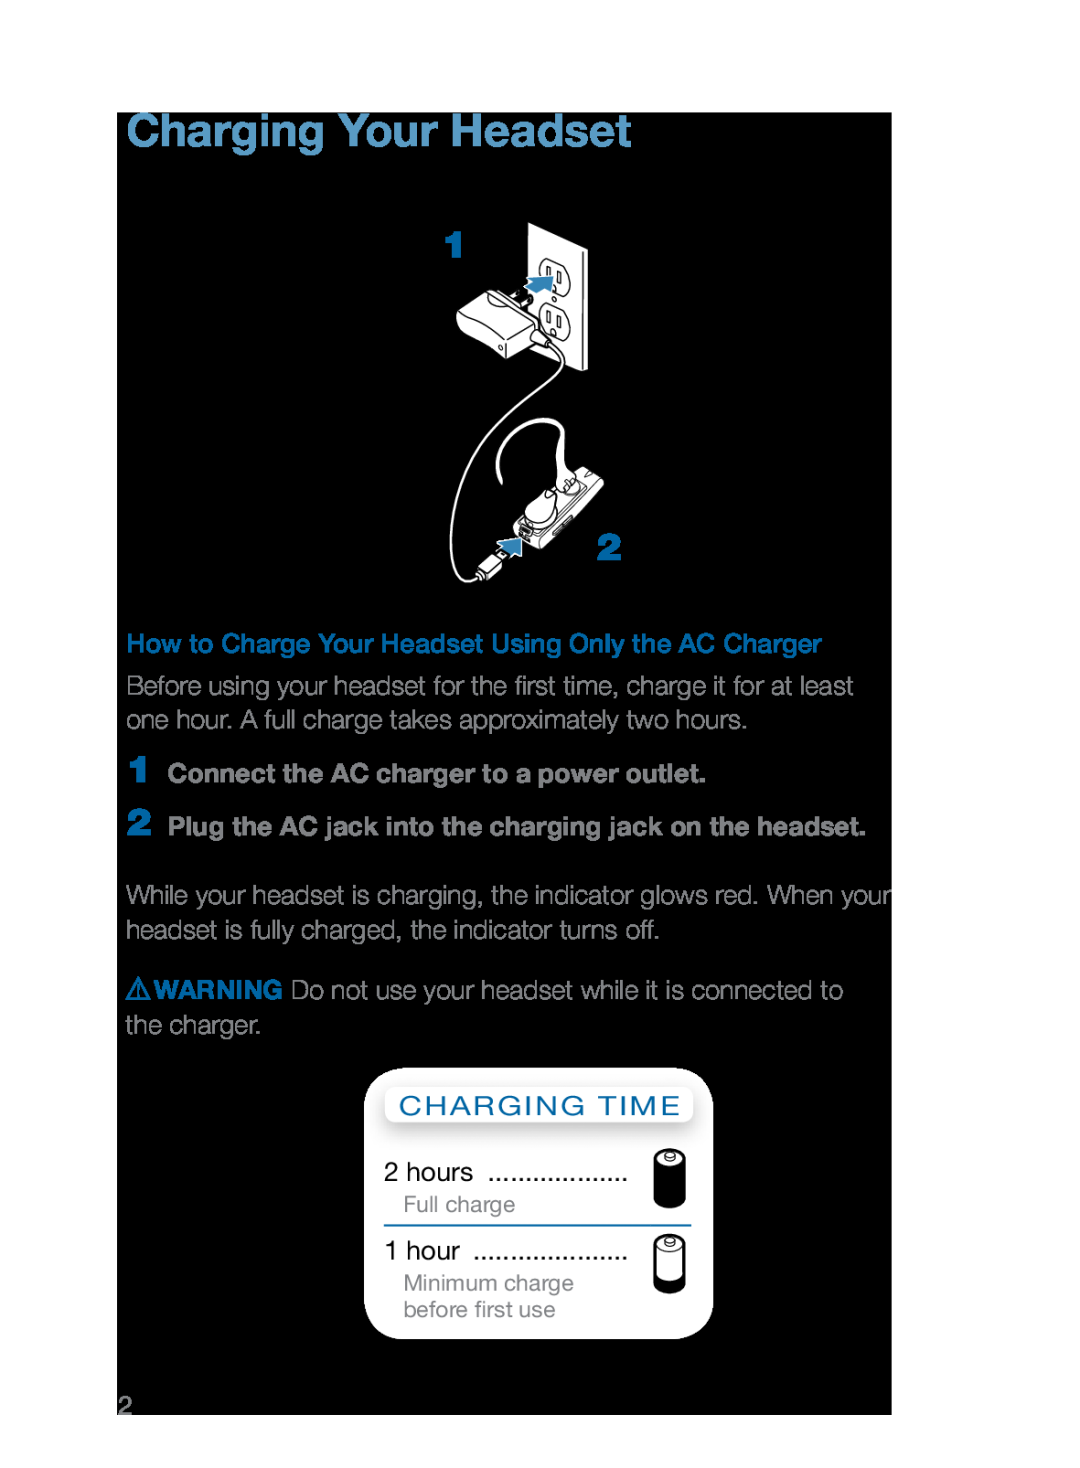 Plantronics 360 manual Charging Your Headset, How to Charge Your Headset Using Only the AC Charger, Charging time 